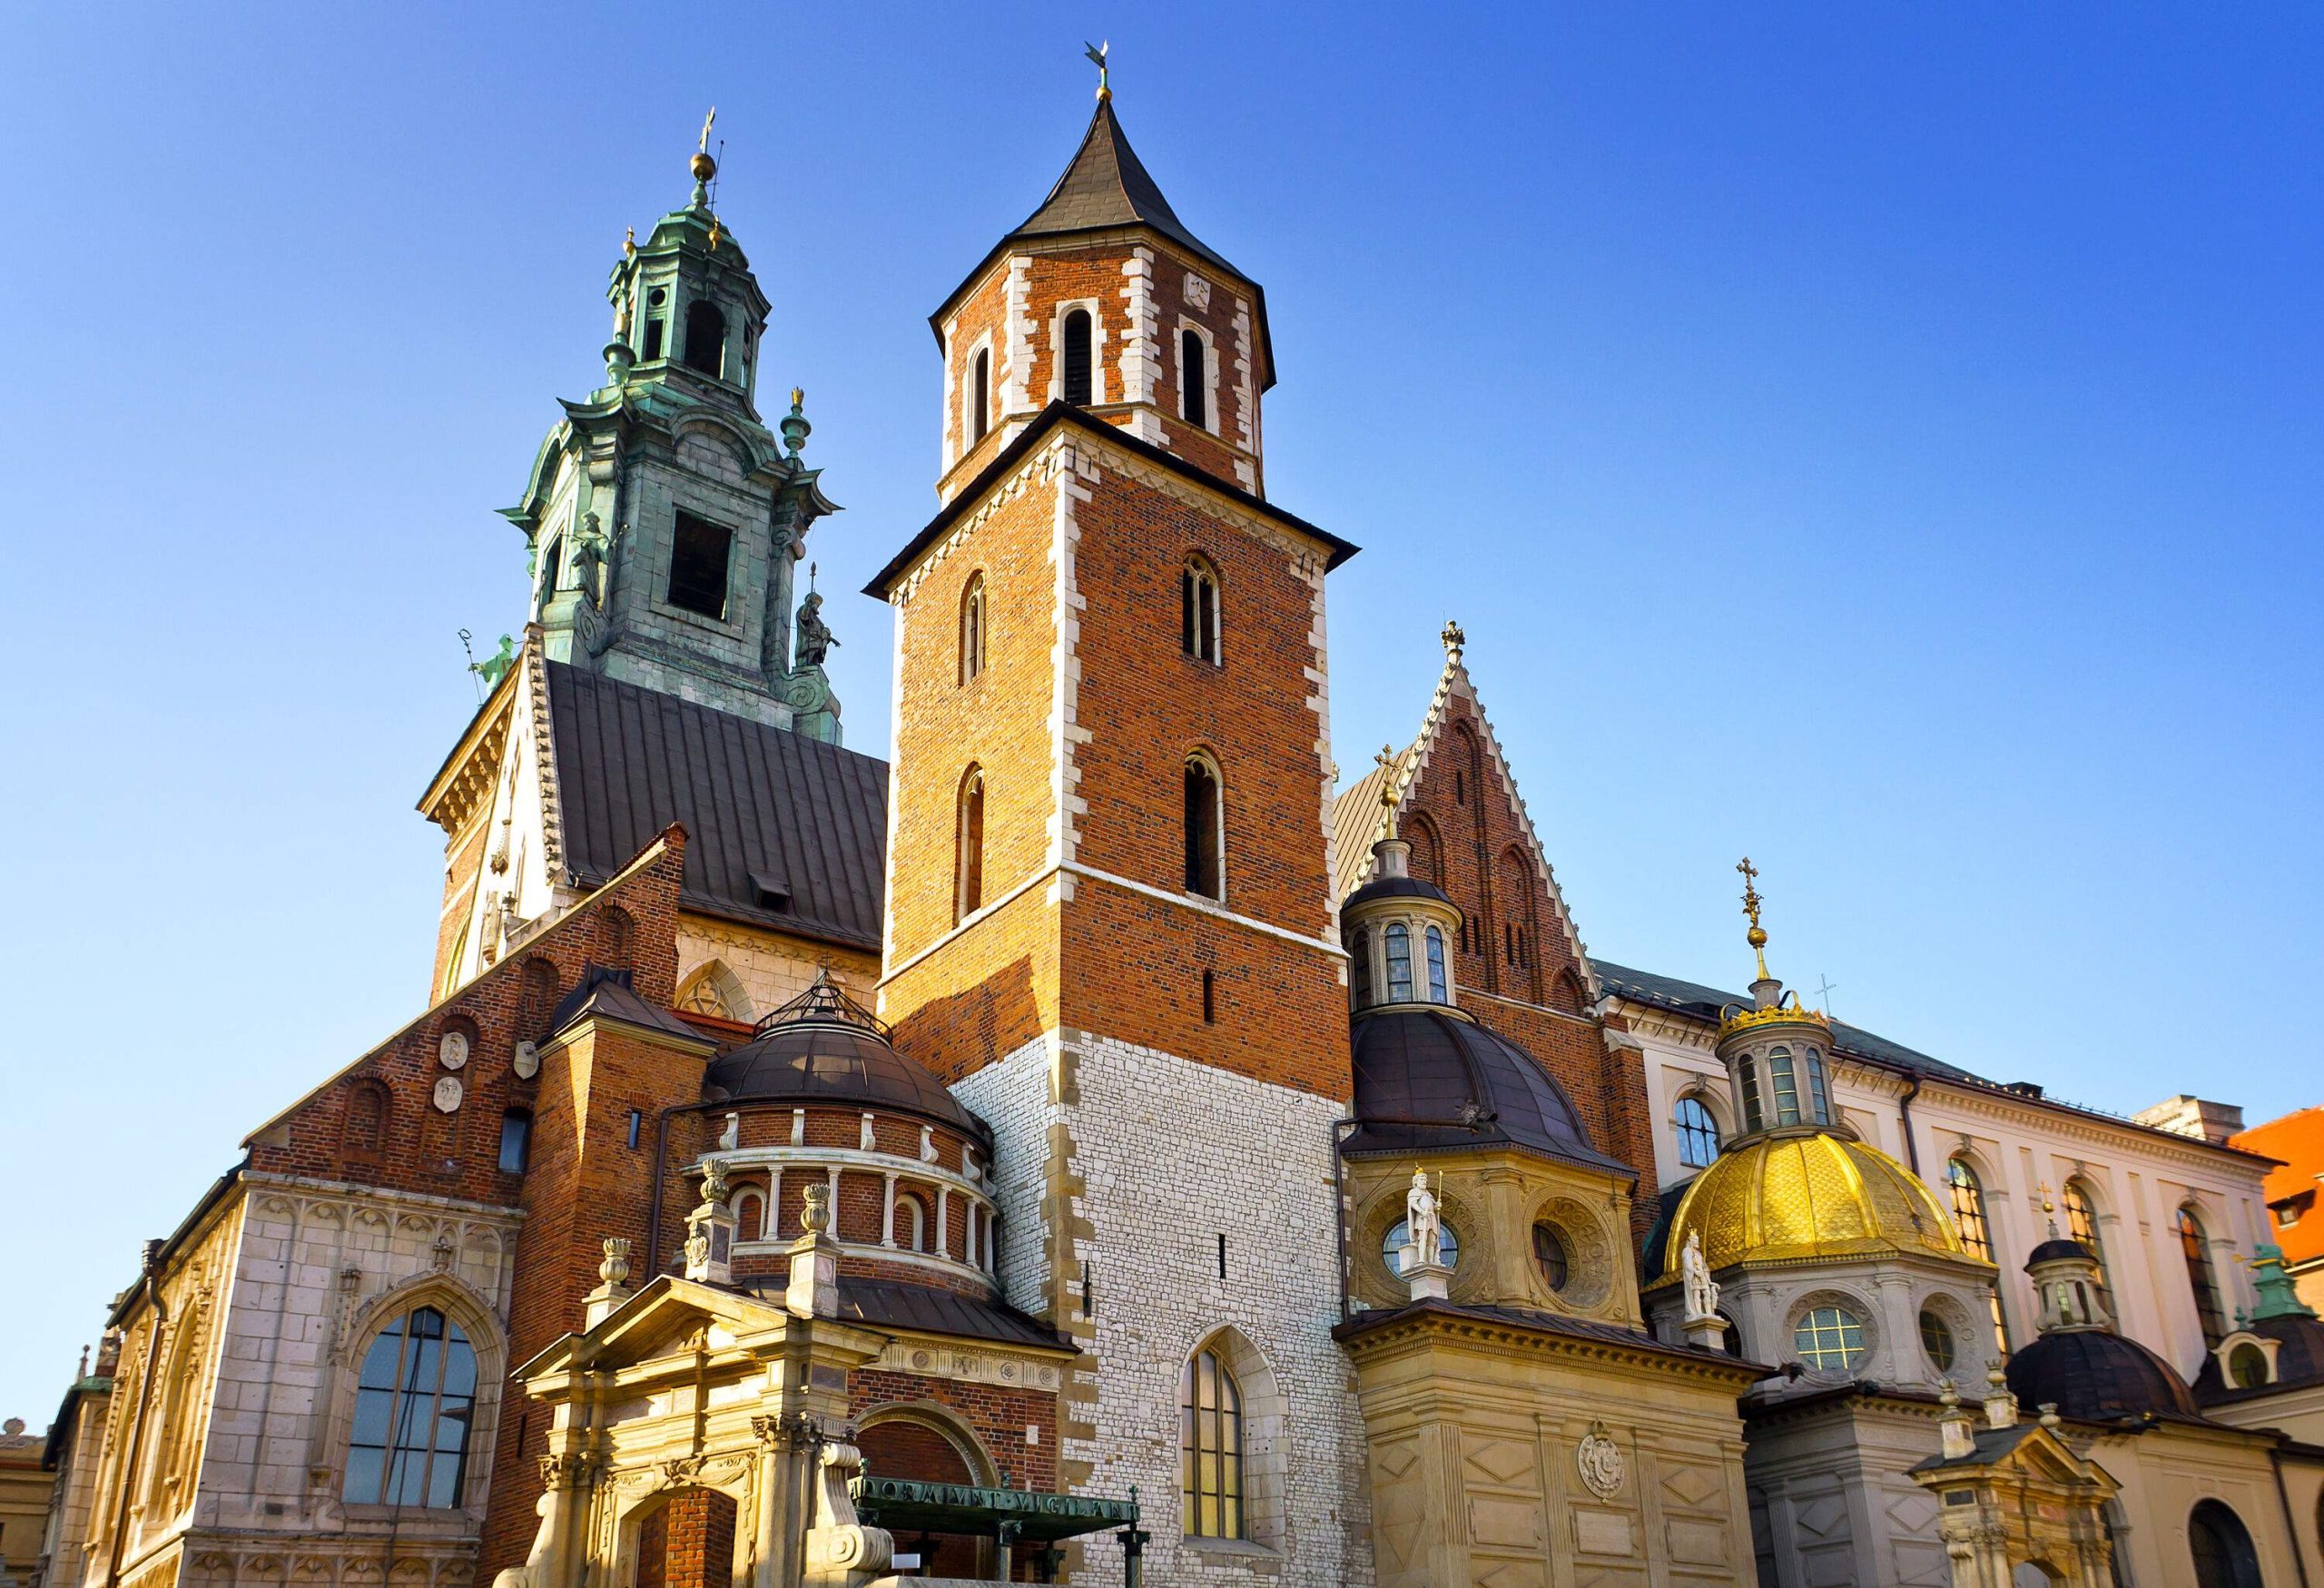 The Wawel Cathedral's eclectic façade with its iconic towers and lantern-topped domes.